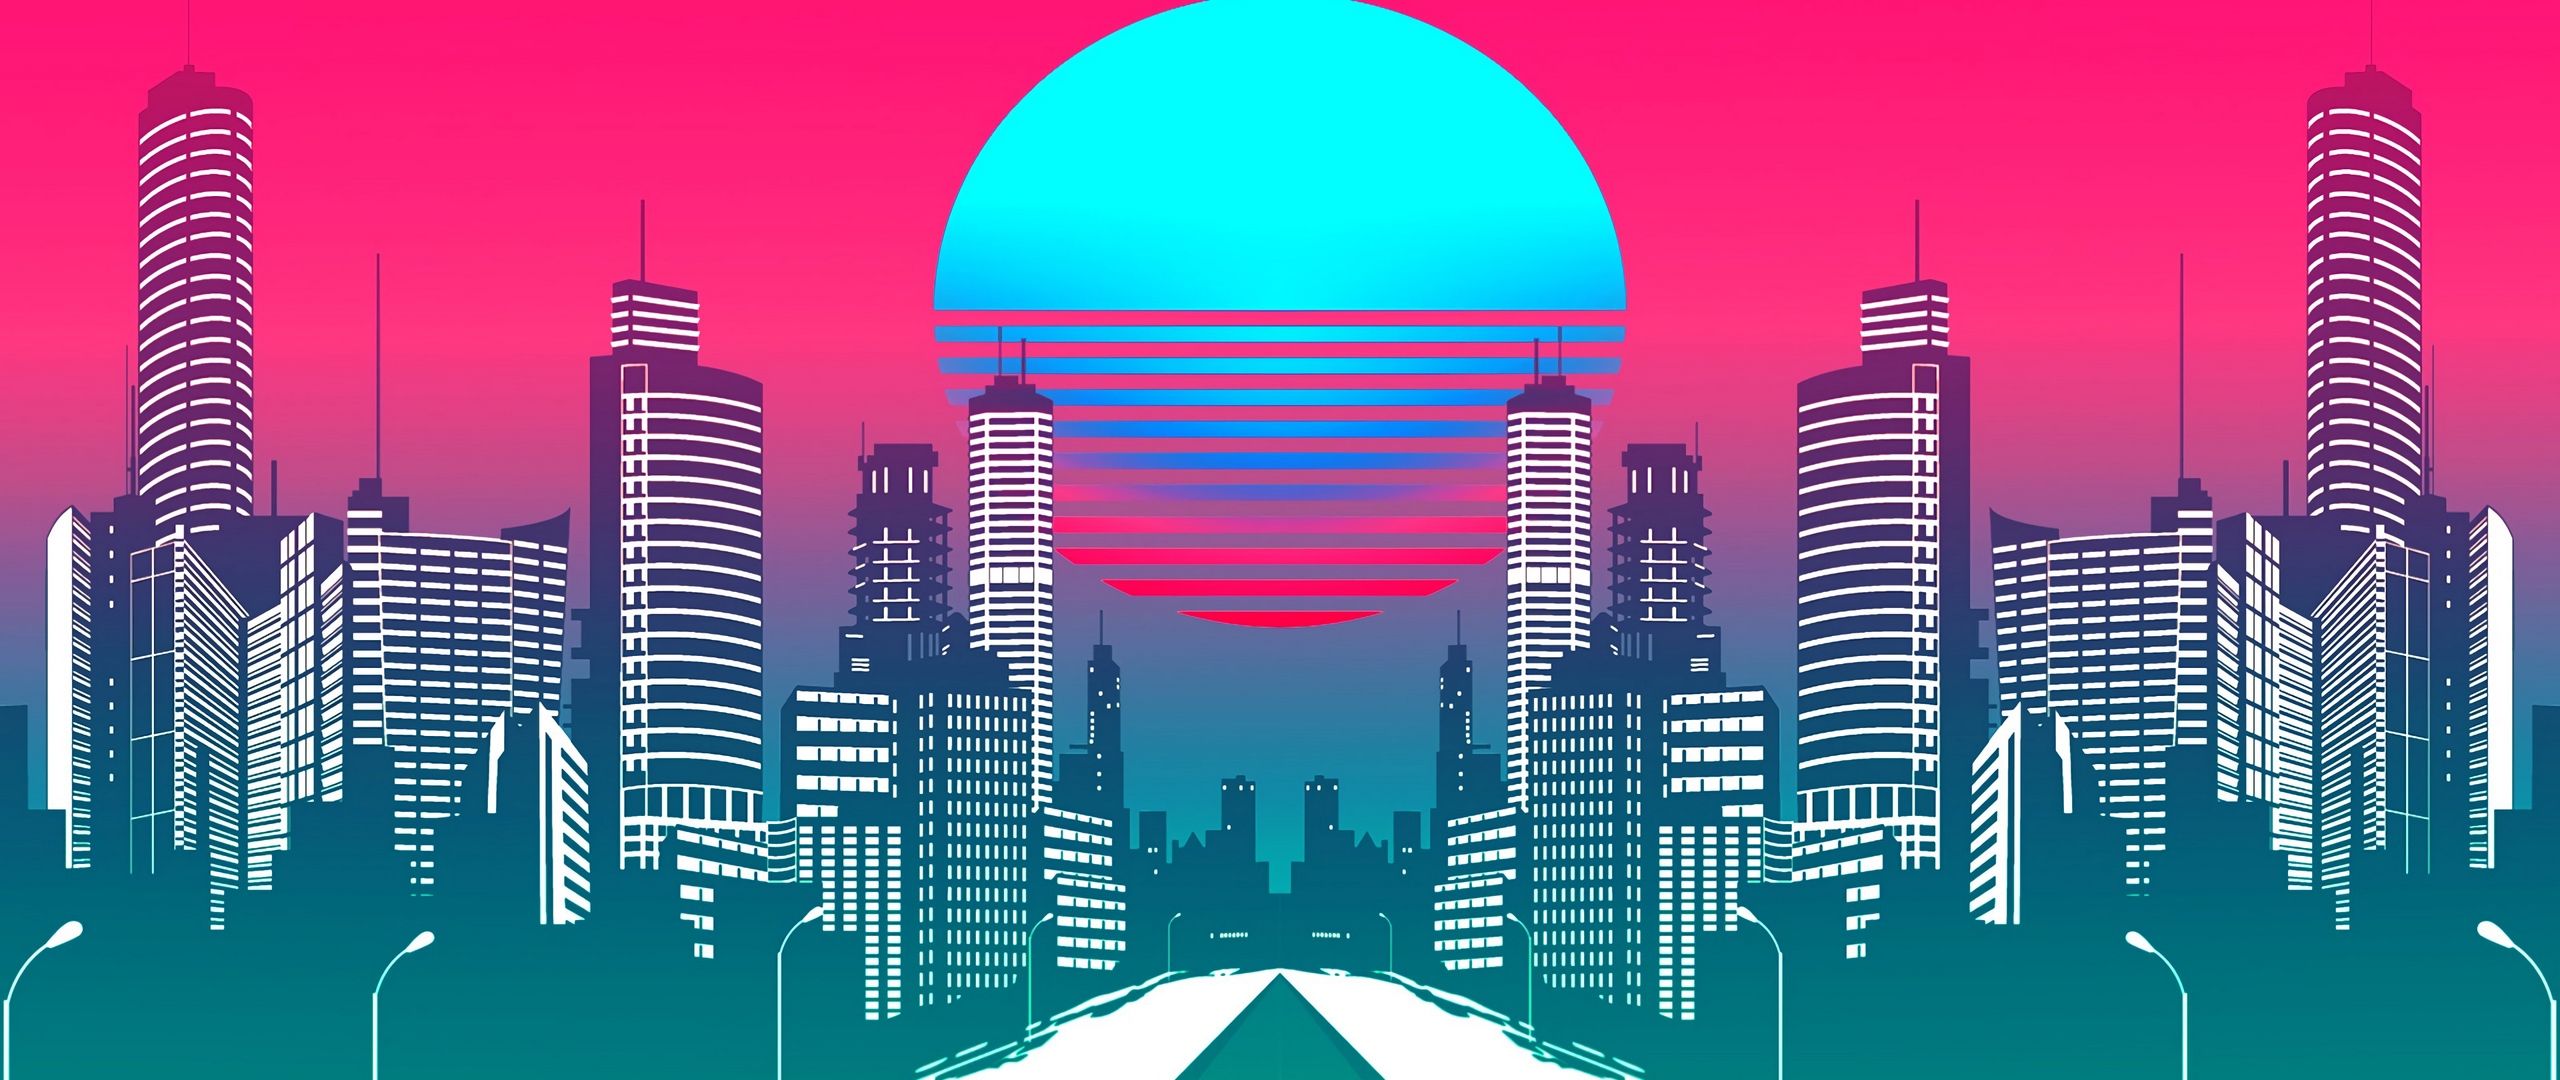 City With Retrowave Illustration With Background Of Sky And Stars HD  Vaporwave Wallpapers, HD Wallpapers